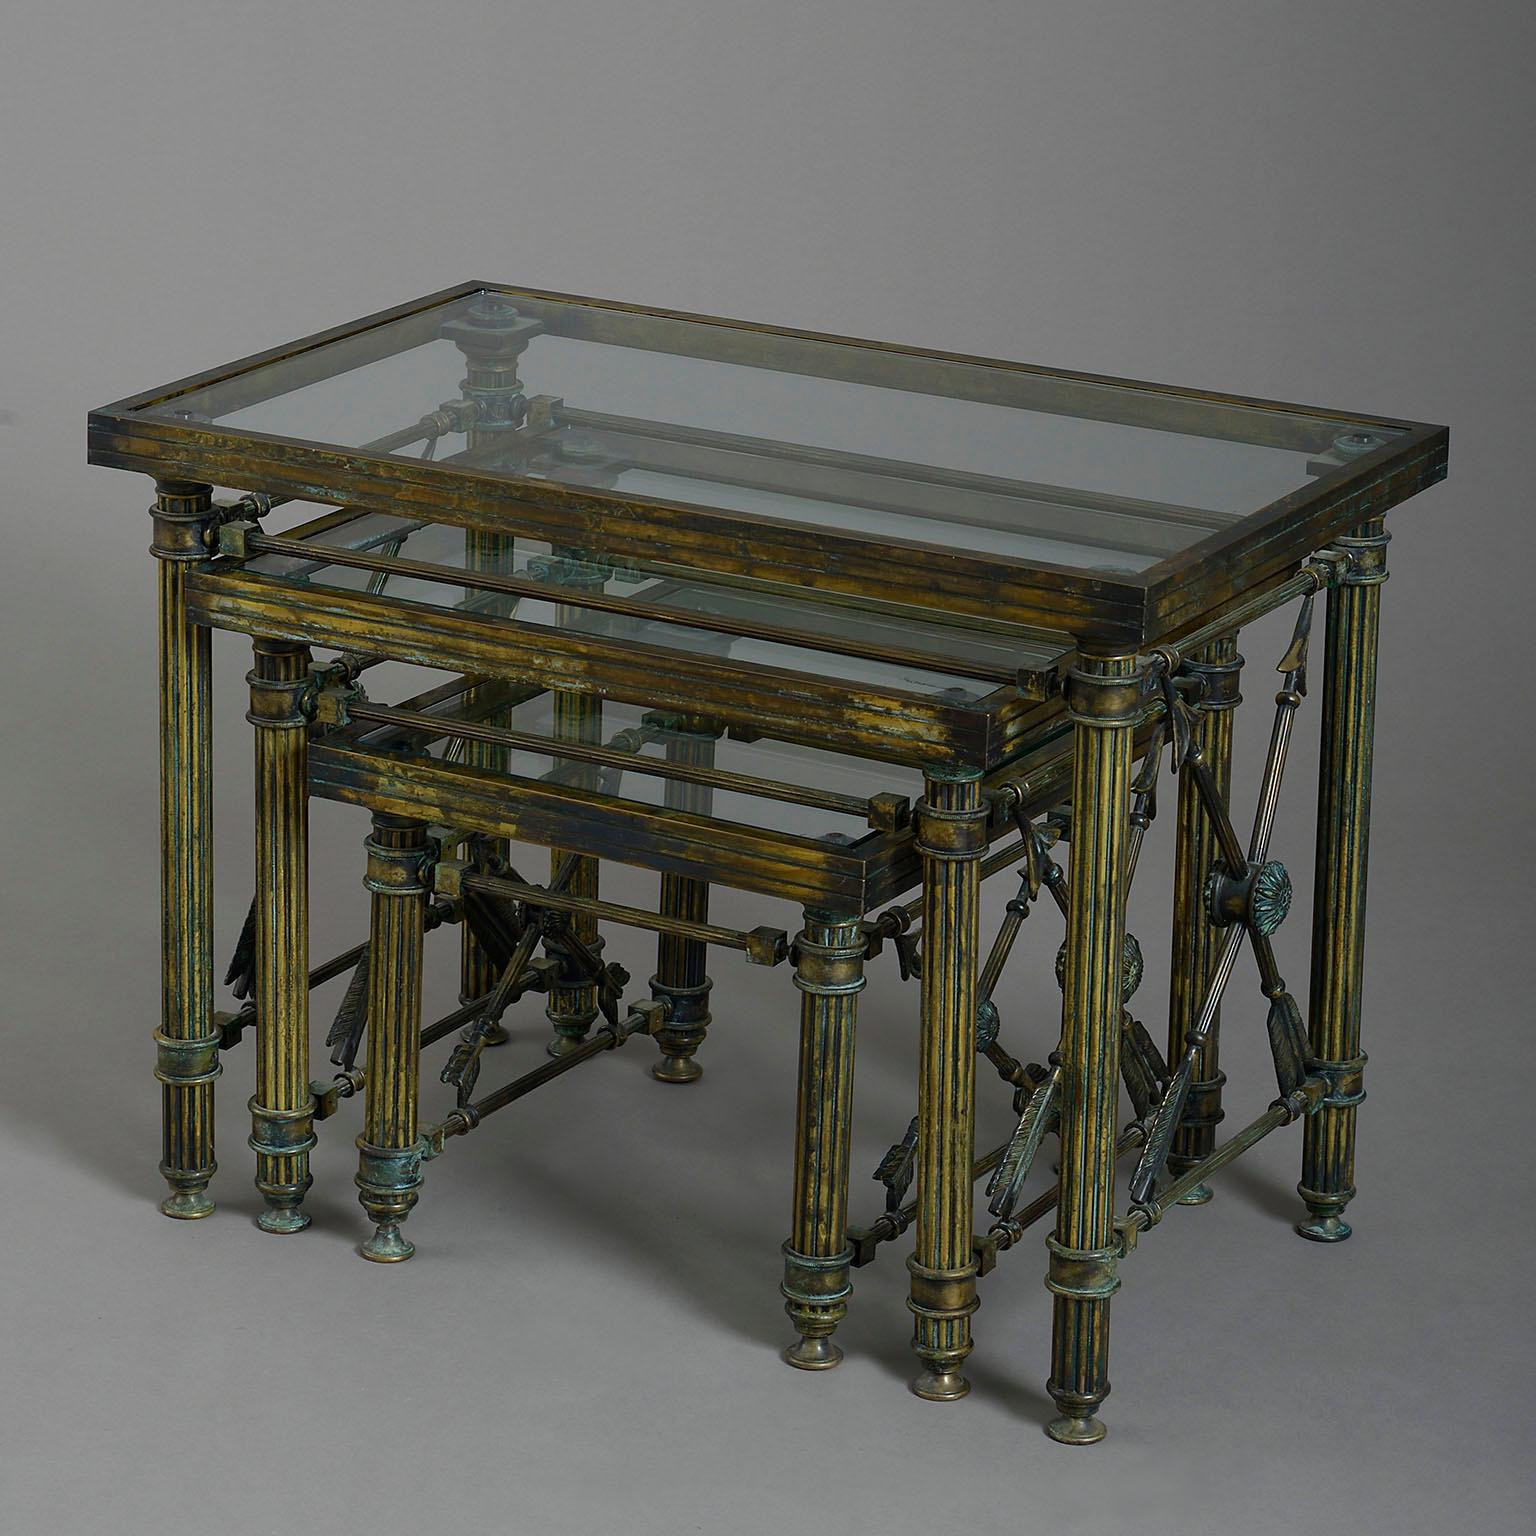 A mid-twentieth century bronzed metal nest of occasional low tables, each with a glass top and mounted on fluted legs with crossed-arrow side supports.

Circa 1950 France

Dimensions: 25.5 W x 15.75 D x 19 H inches
65 W x 40 D x 49 H cm